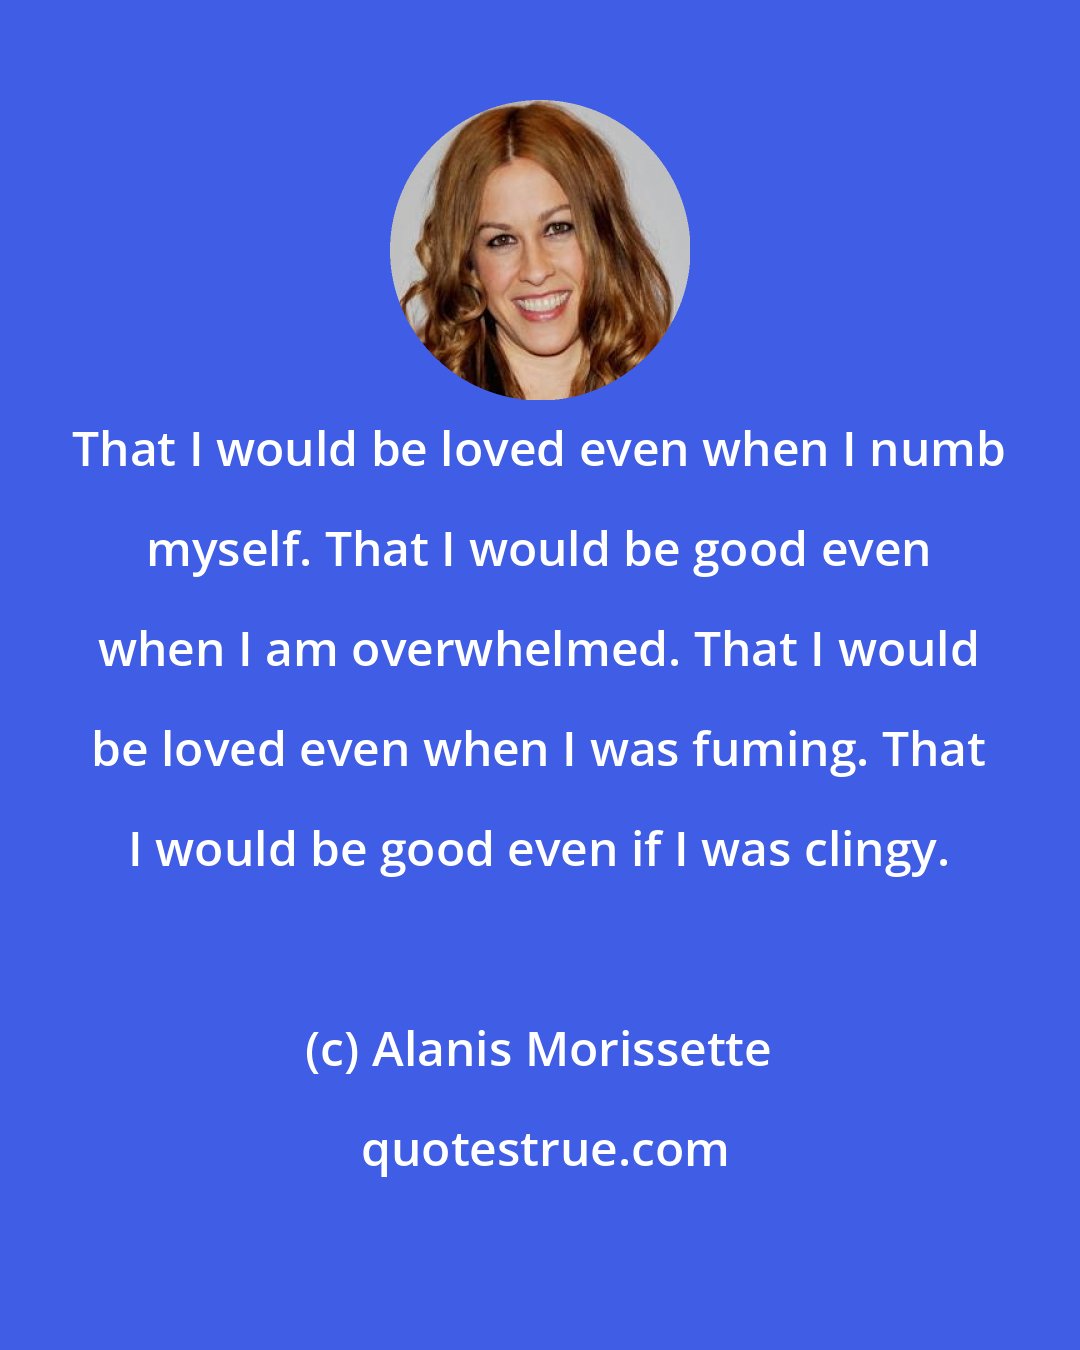 Alanis Morissette: That I would be loved even when I numb myself. That I would be good even when I am overwhelmed. That I would be loved even when I was fuming. That I would be good even if I was clingy.